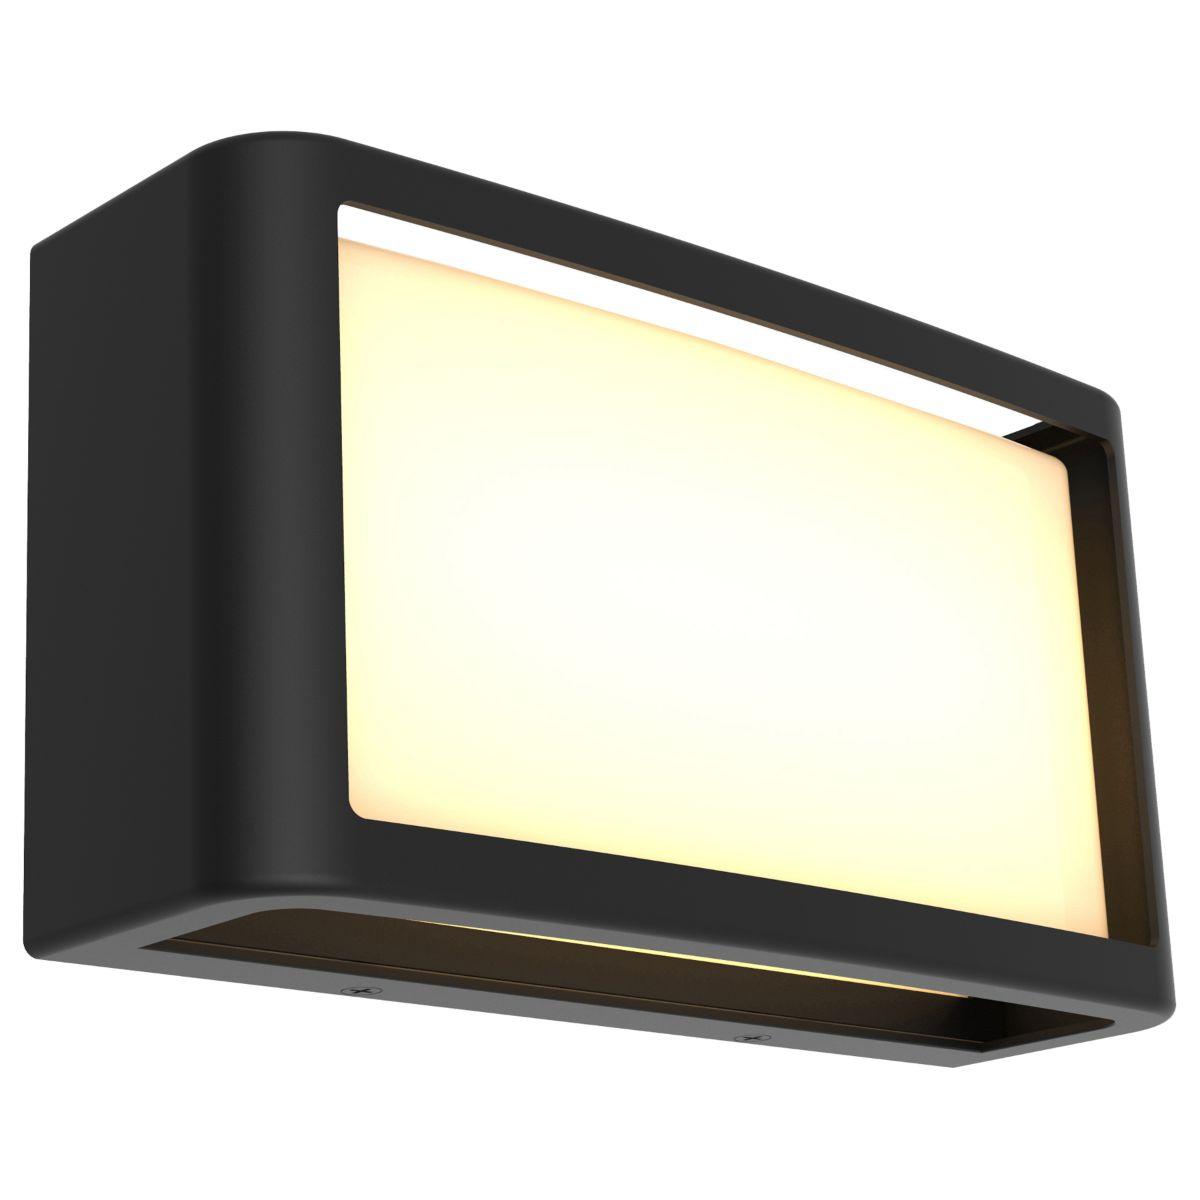 Malibu 9 in. LED Outdoor Wall Sconce